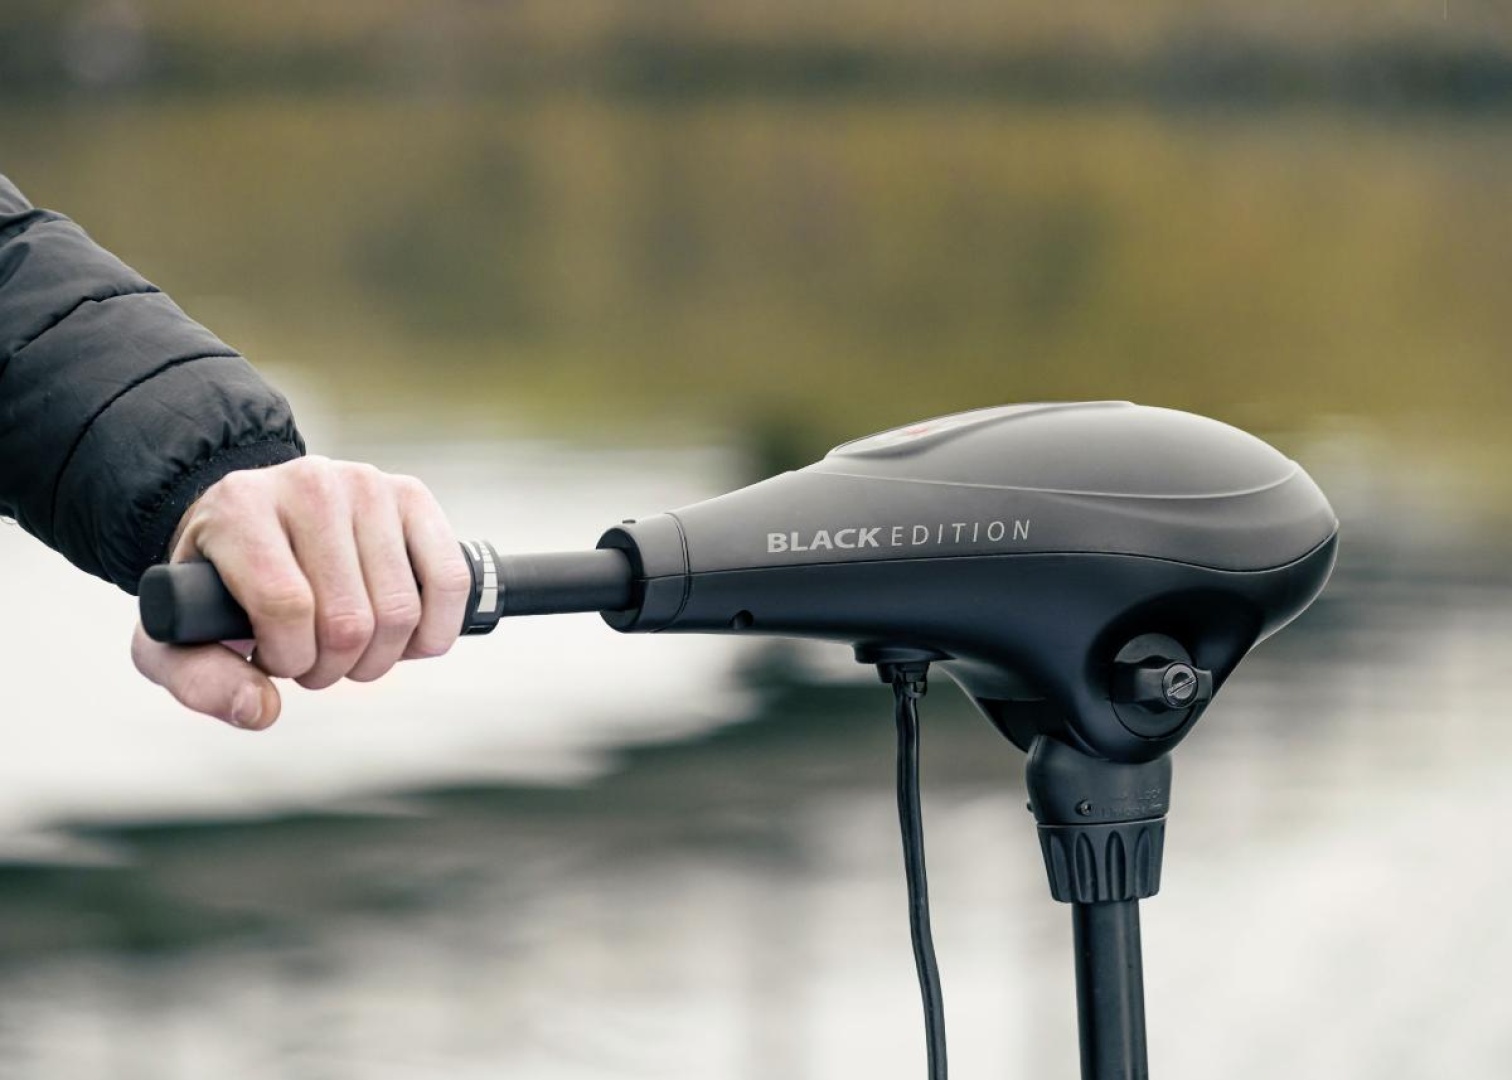 Rhino BE 35 Black Edition Electric Outboard Motor